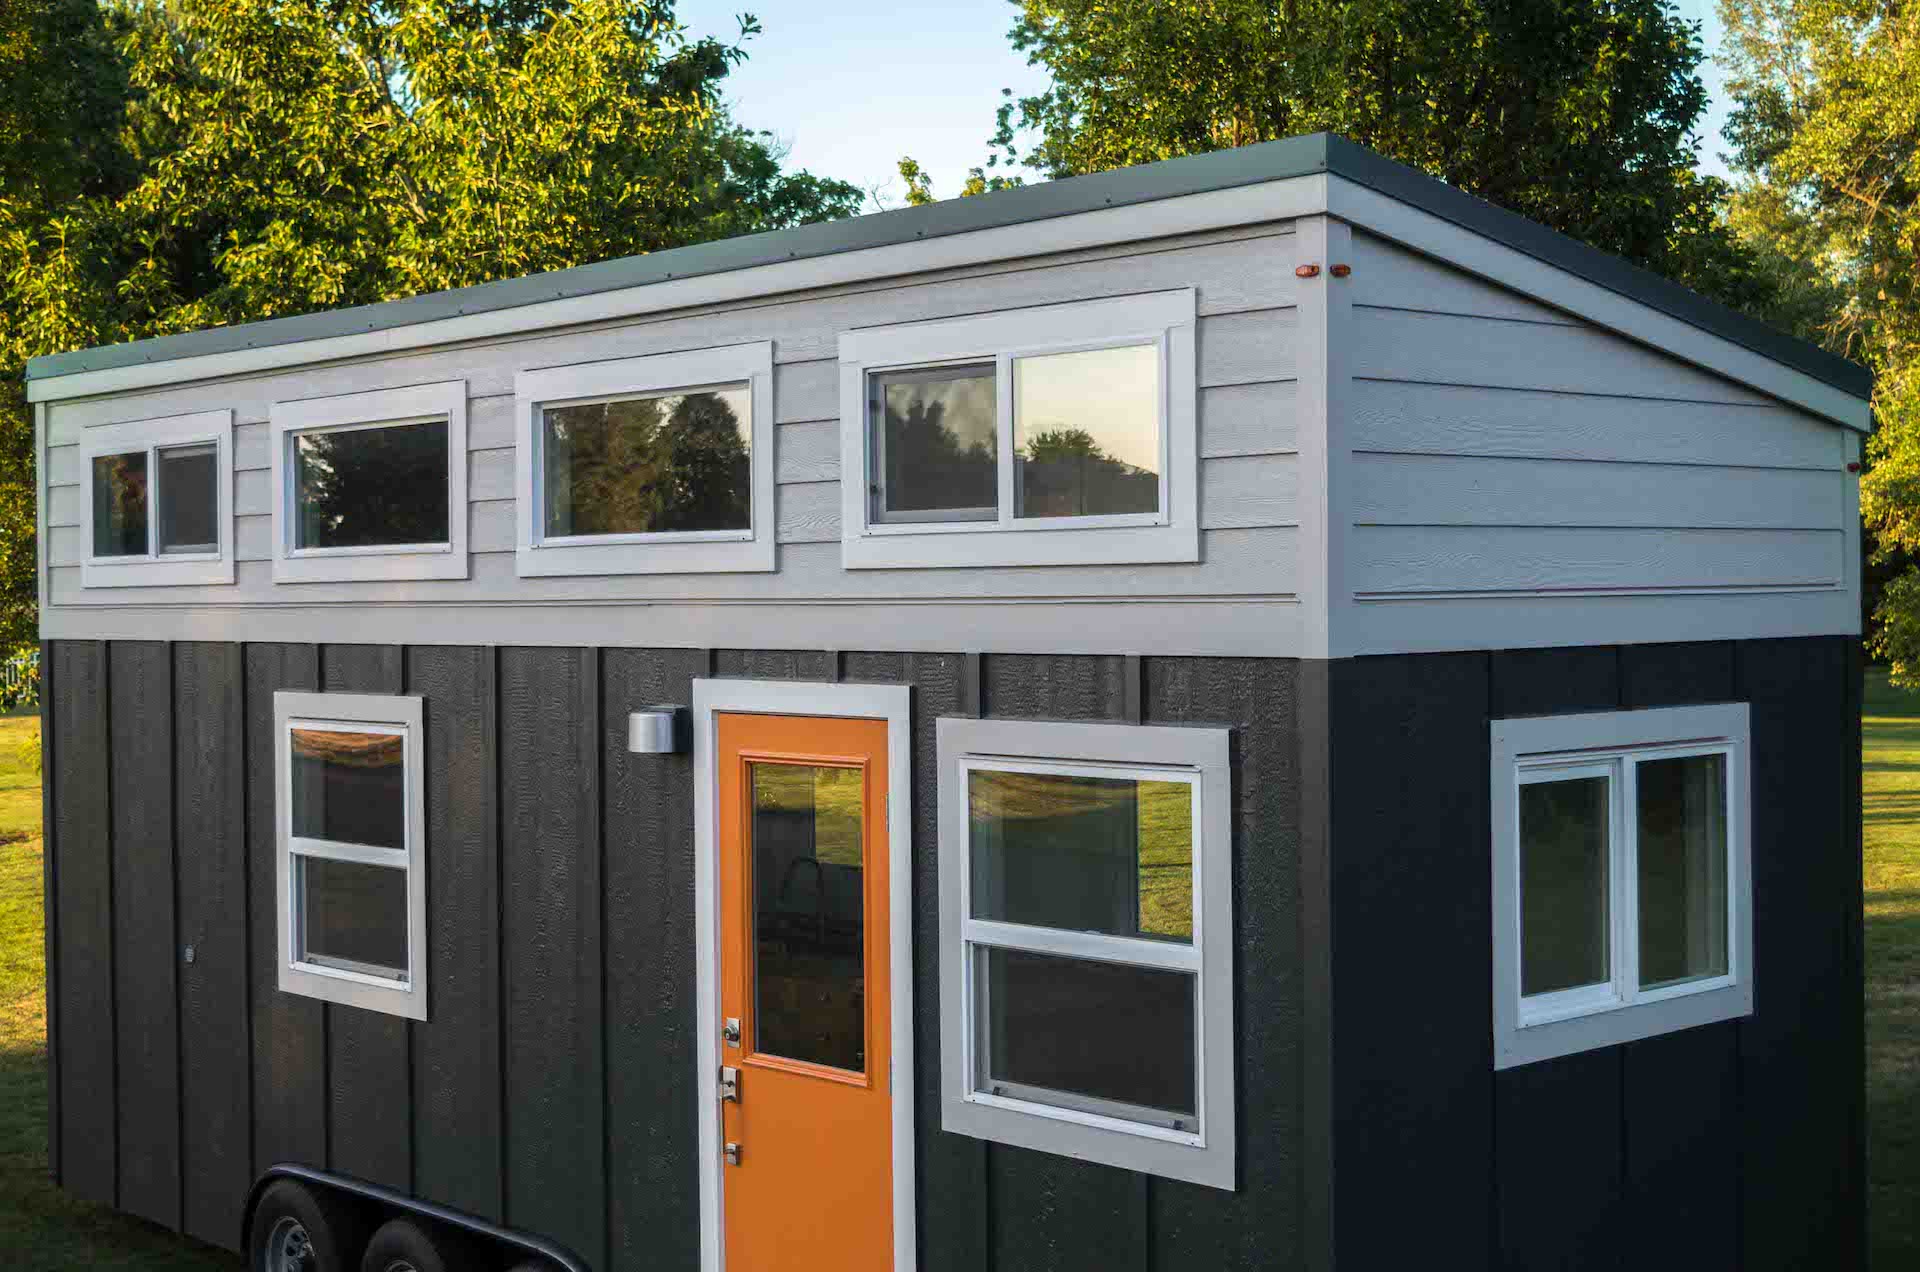 Seattle's tiny homes get a big upgrade